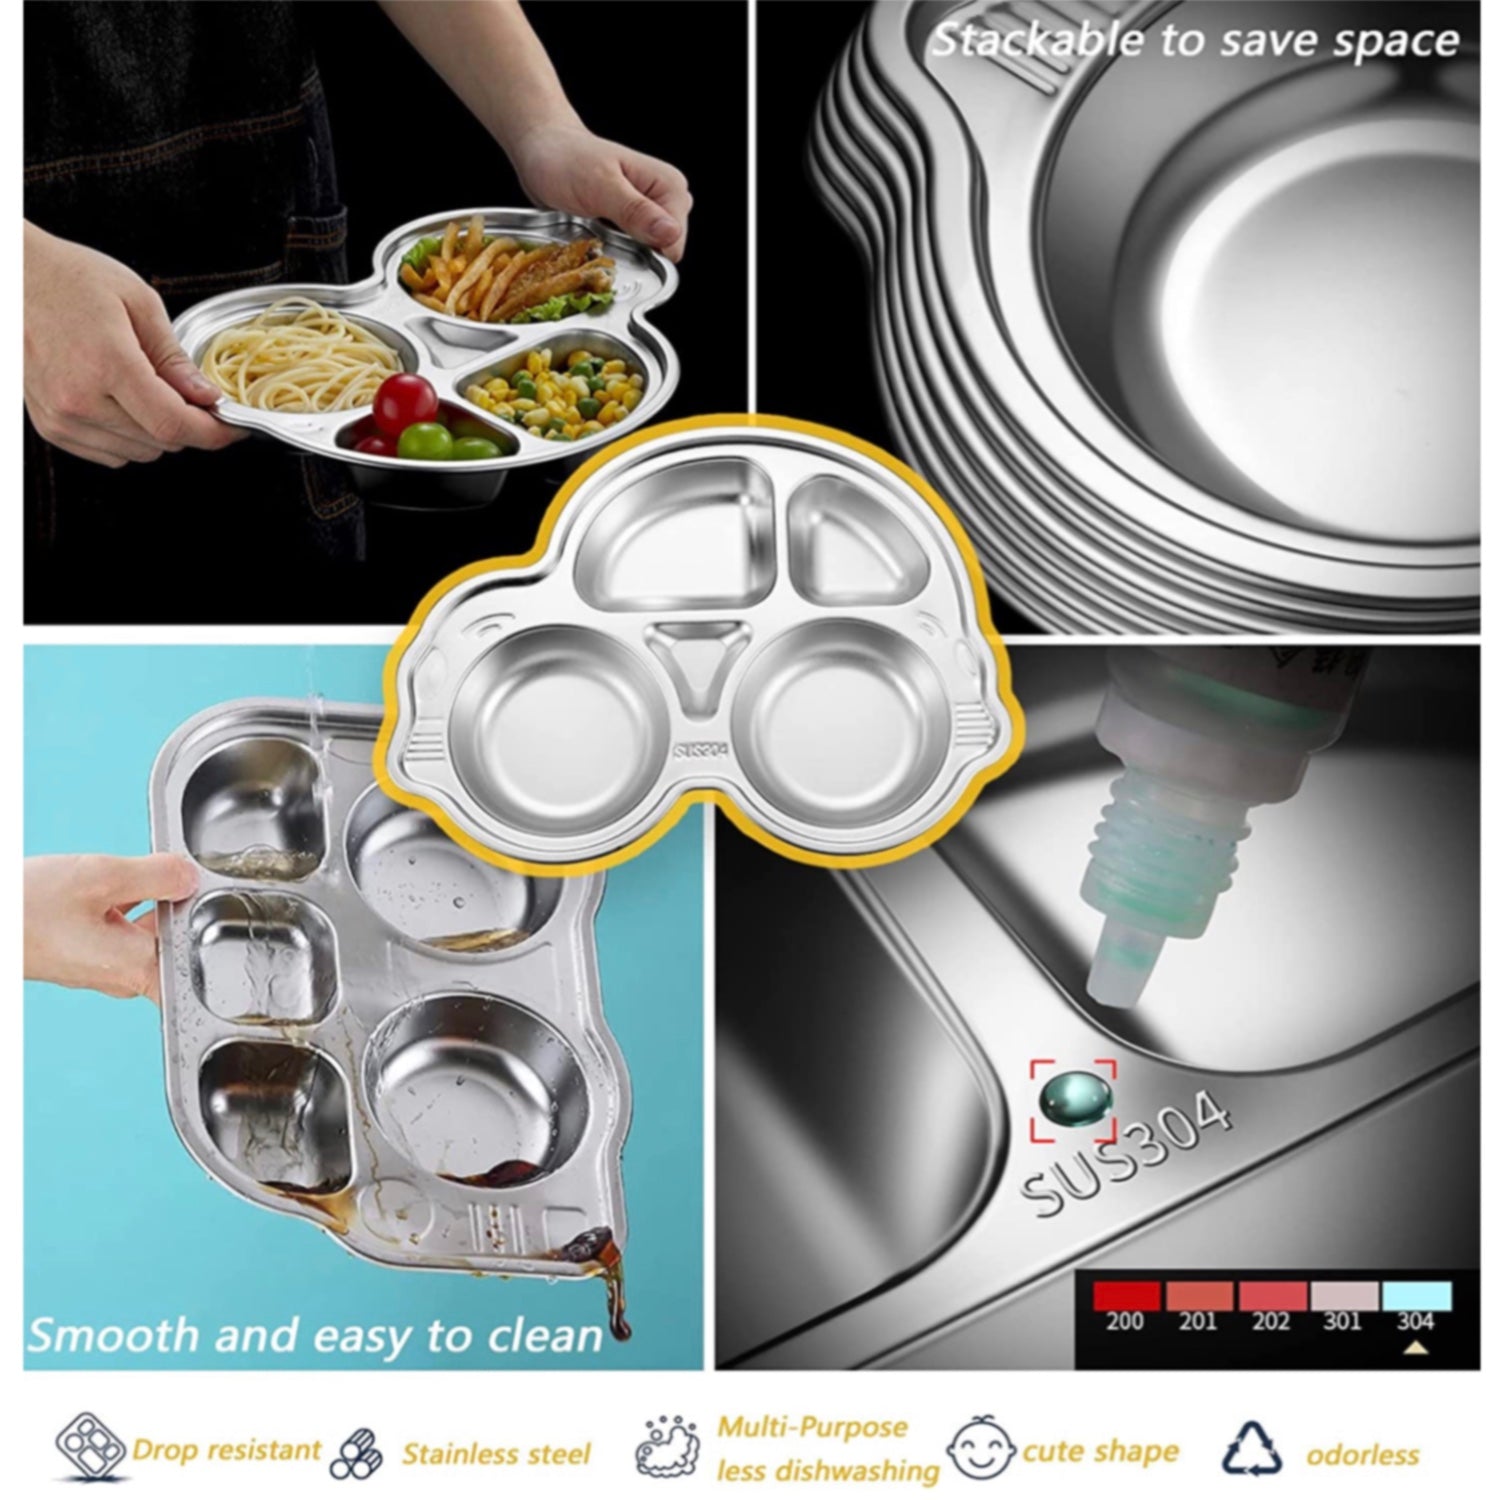 Theoni Stainless Steel Divided Meal  Plate Tray-4Compartments Dinner Dish for Baby- Toddler- Kids Feeding set - Car Shape- BPA-Free Safe Fun Non-Toxic Heavy Duty .